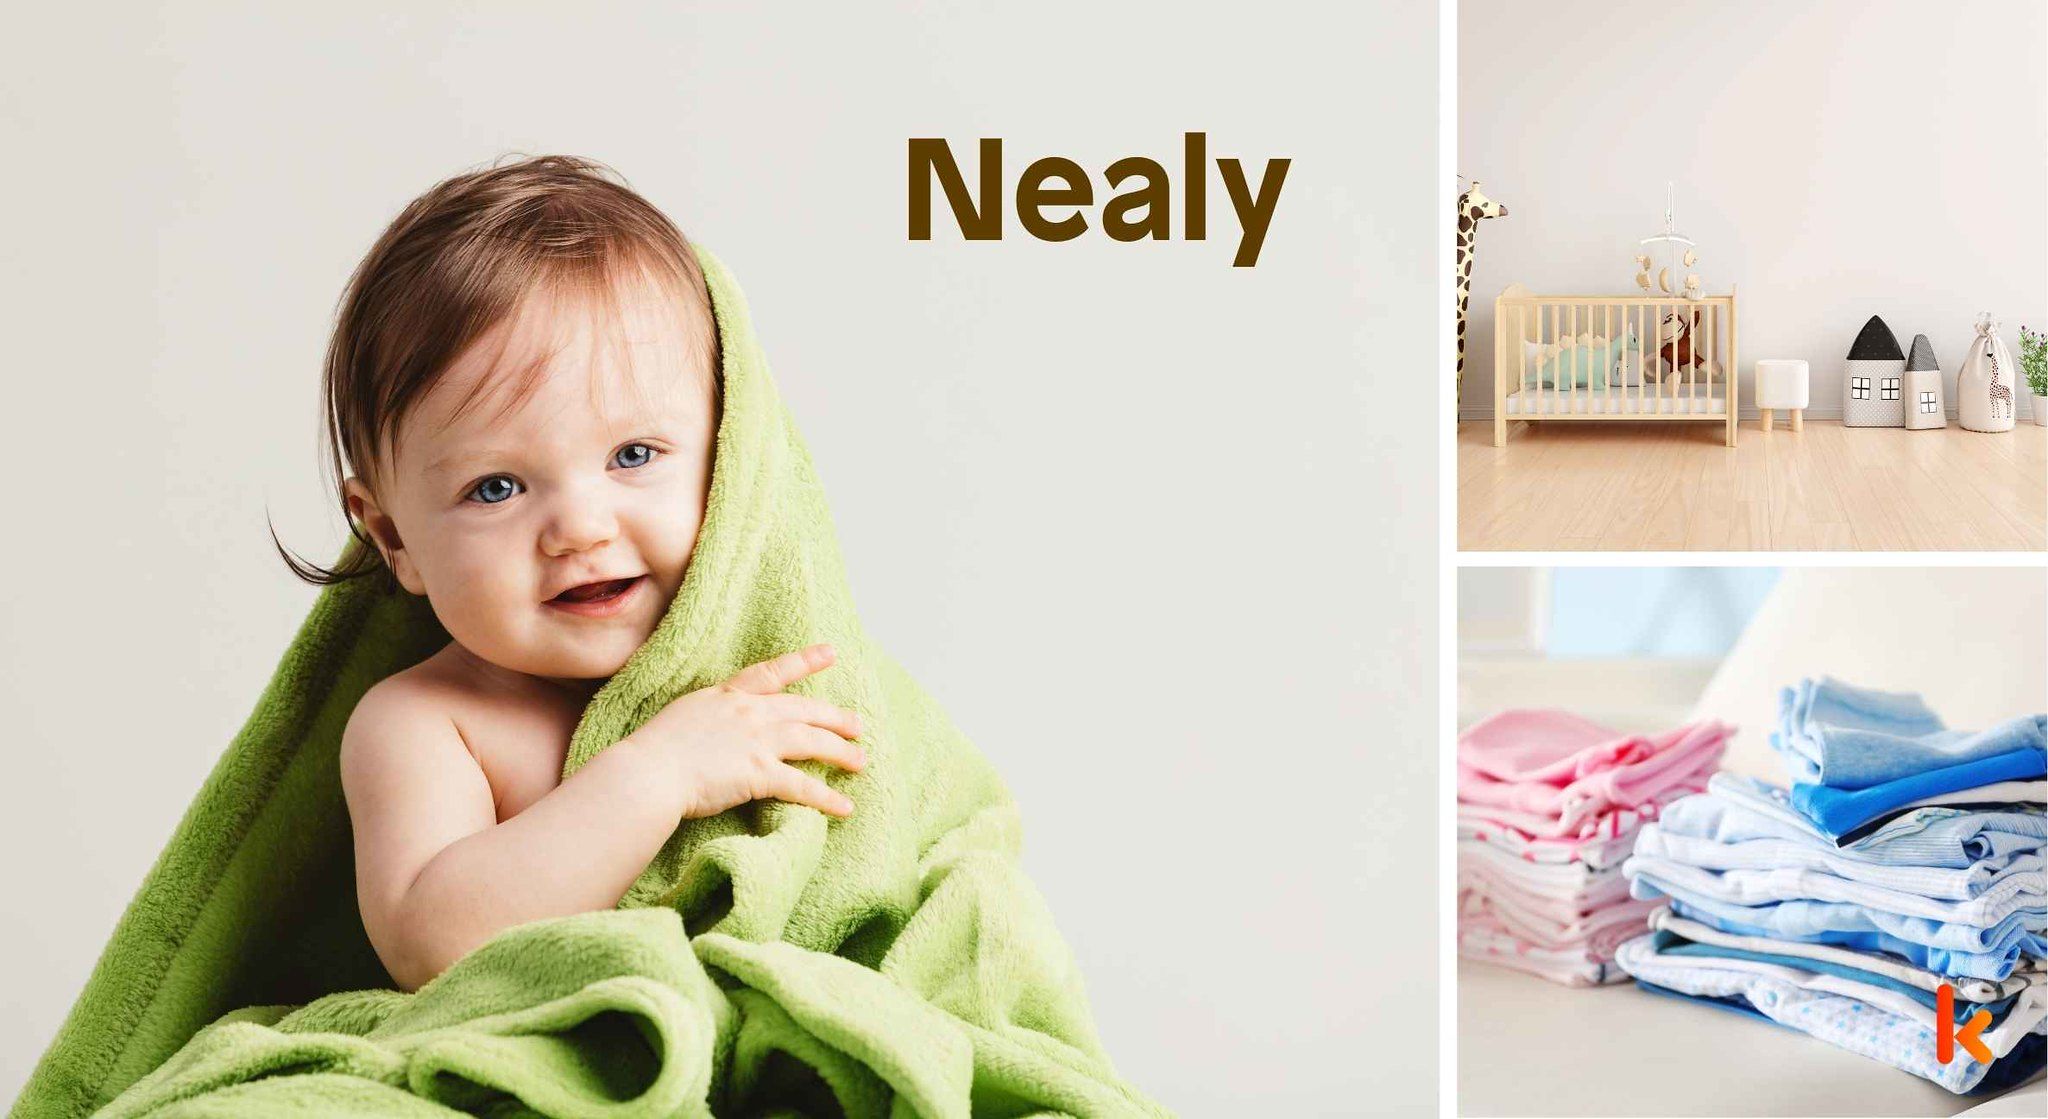 Meaning of the name Nealy